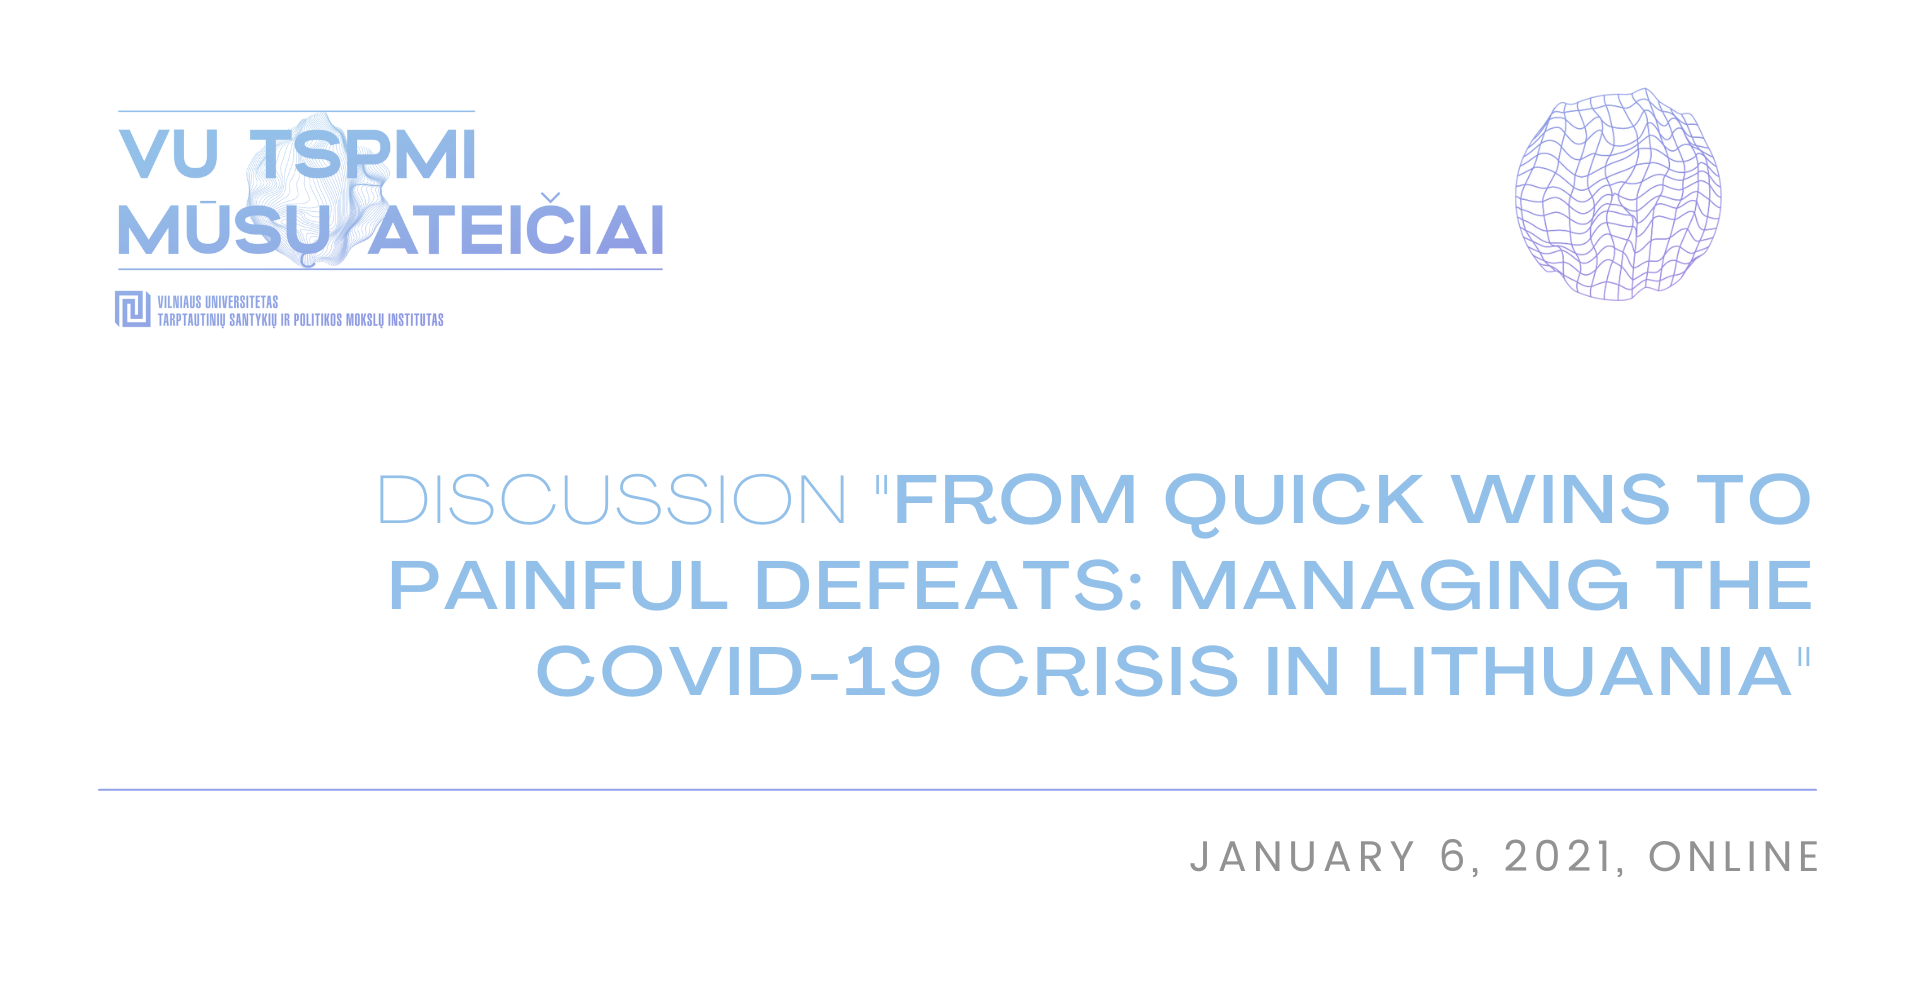 Discussion “From quick wins to painful defeats: managing the COVID-19 crisis in Lithuania”